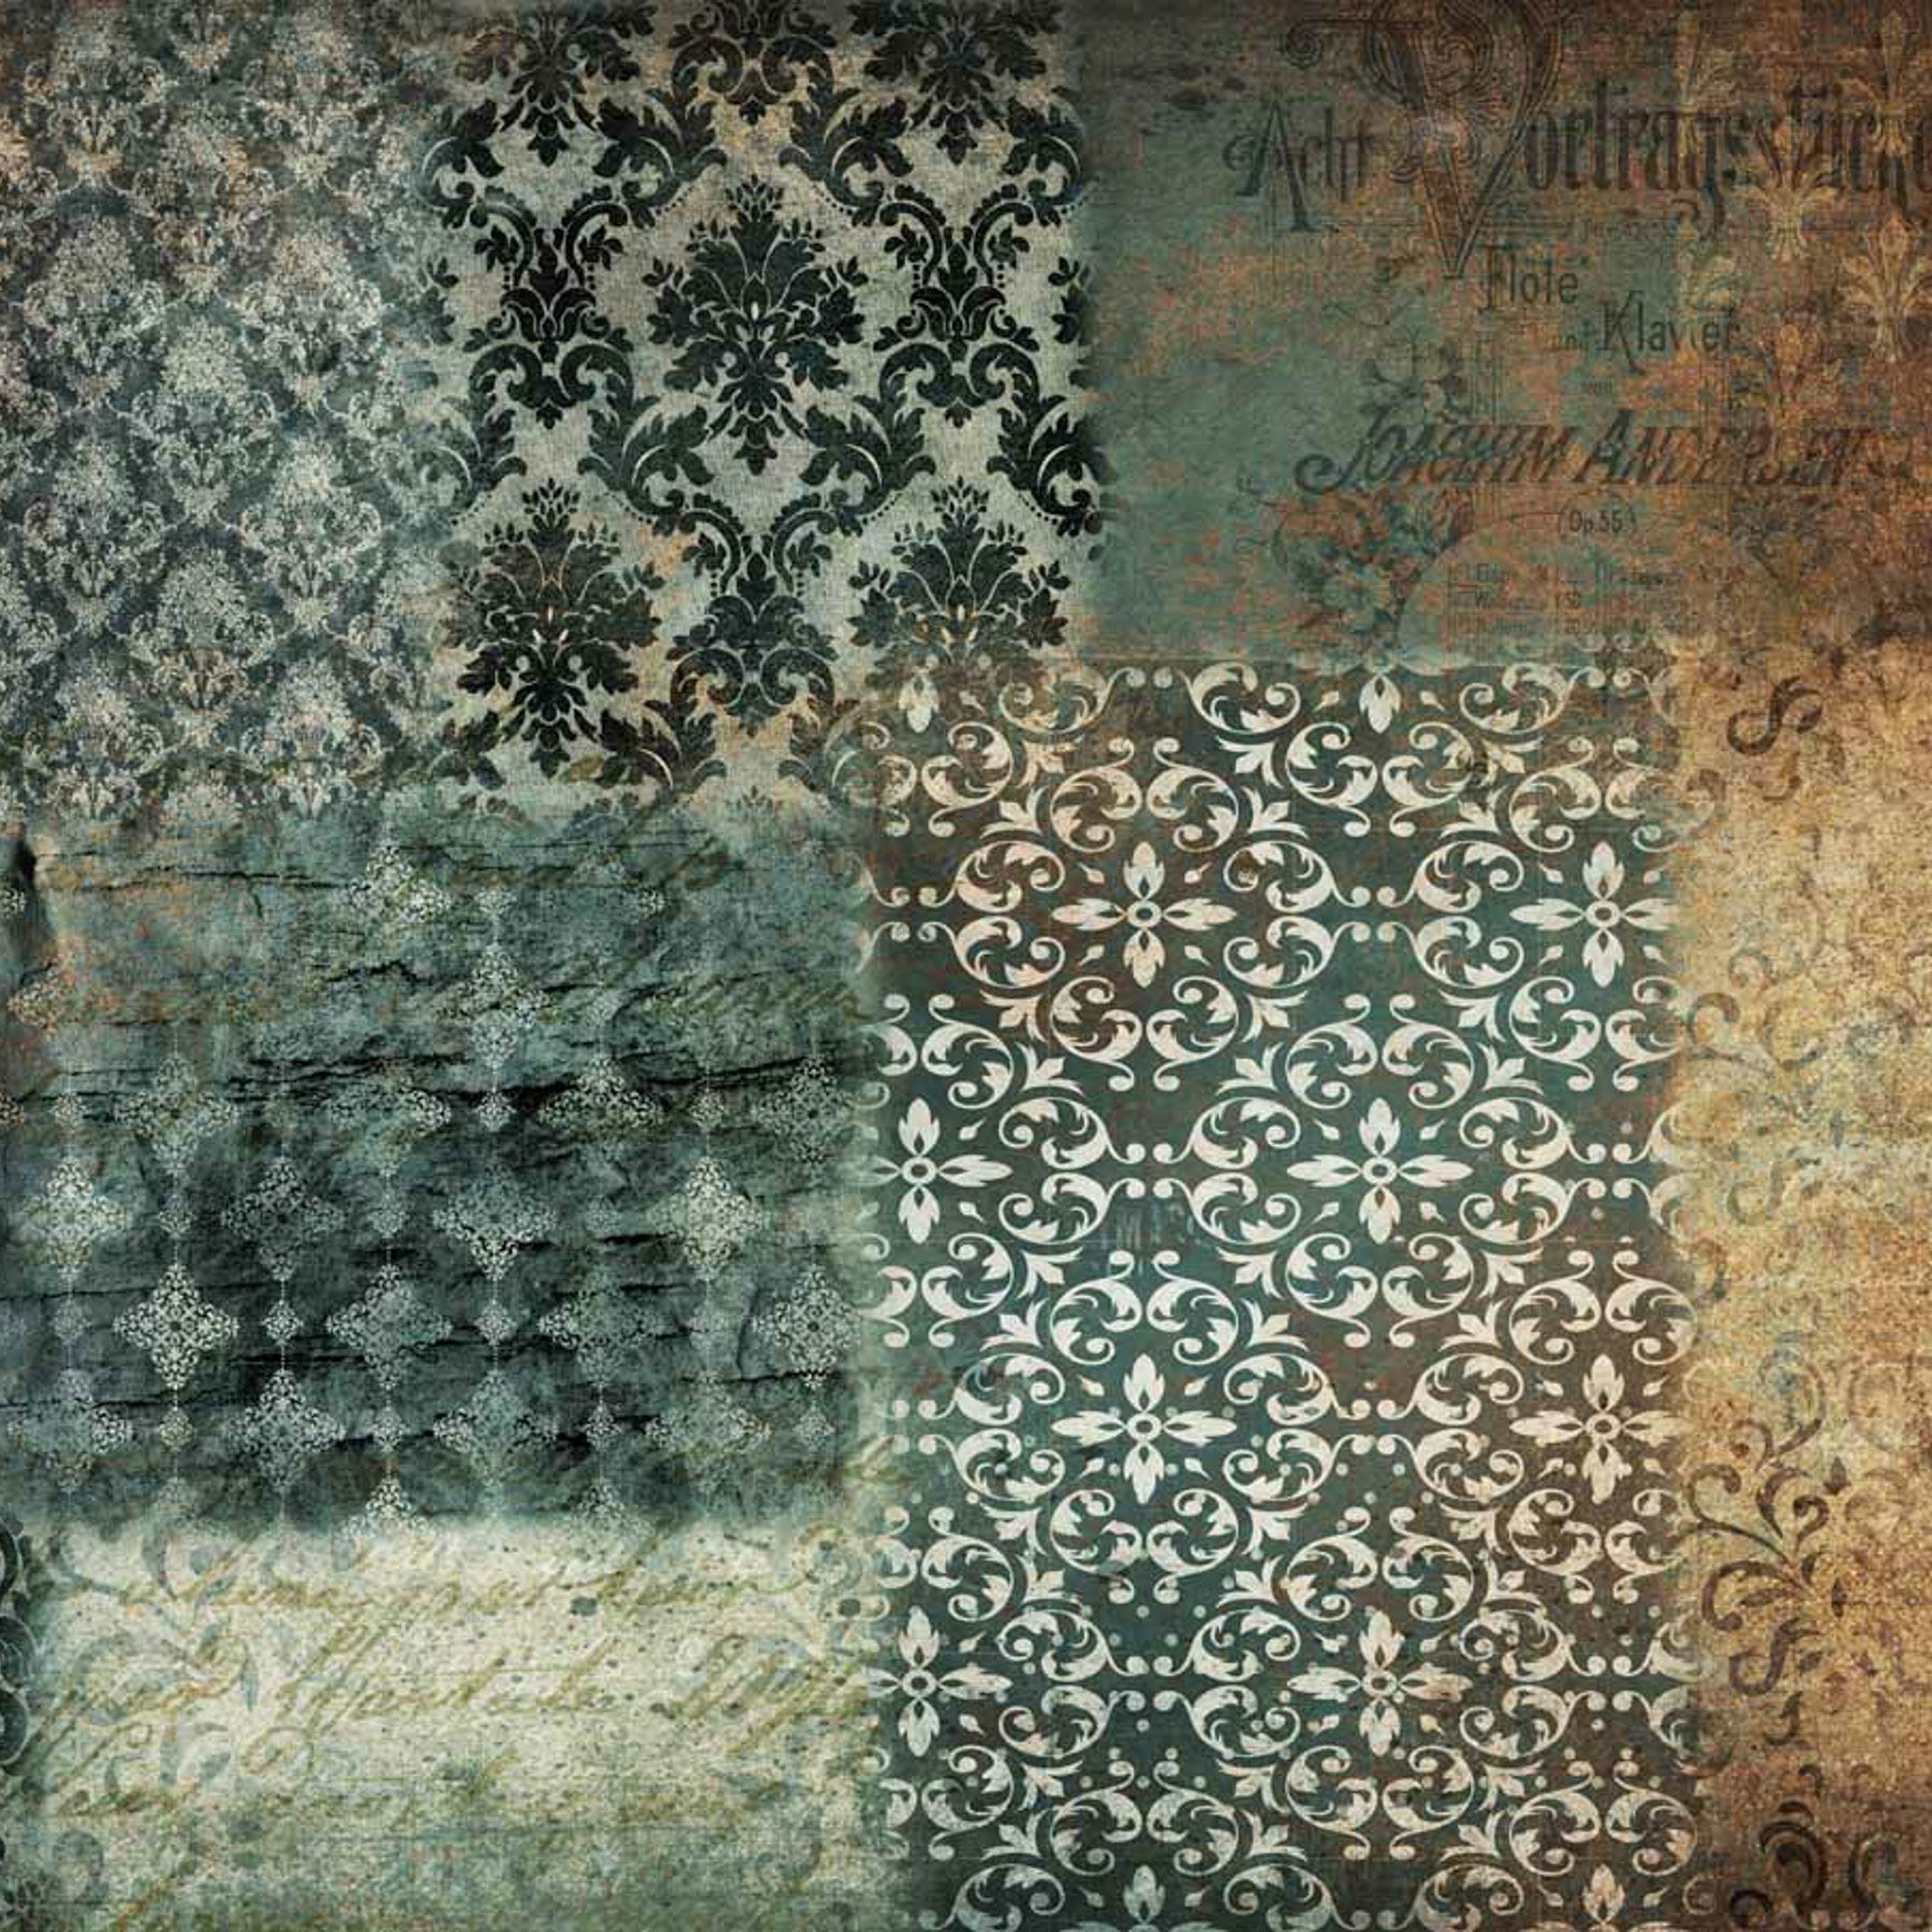 Close-up of an A1 rice paper design that features a beautiful collage of damask designs in rich tones of patina, rust, and sepia.